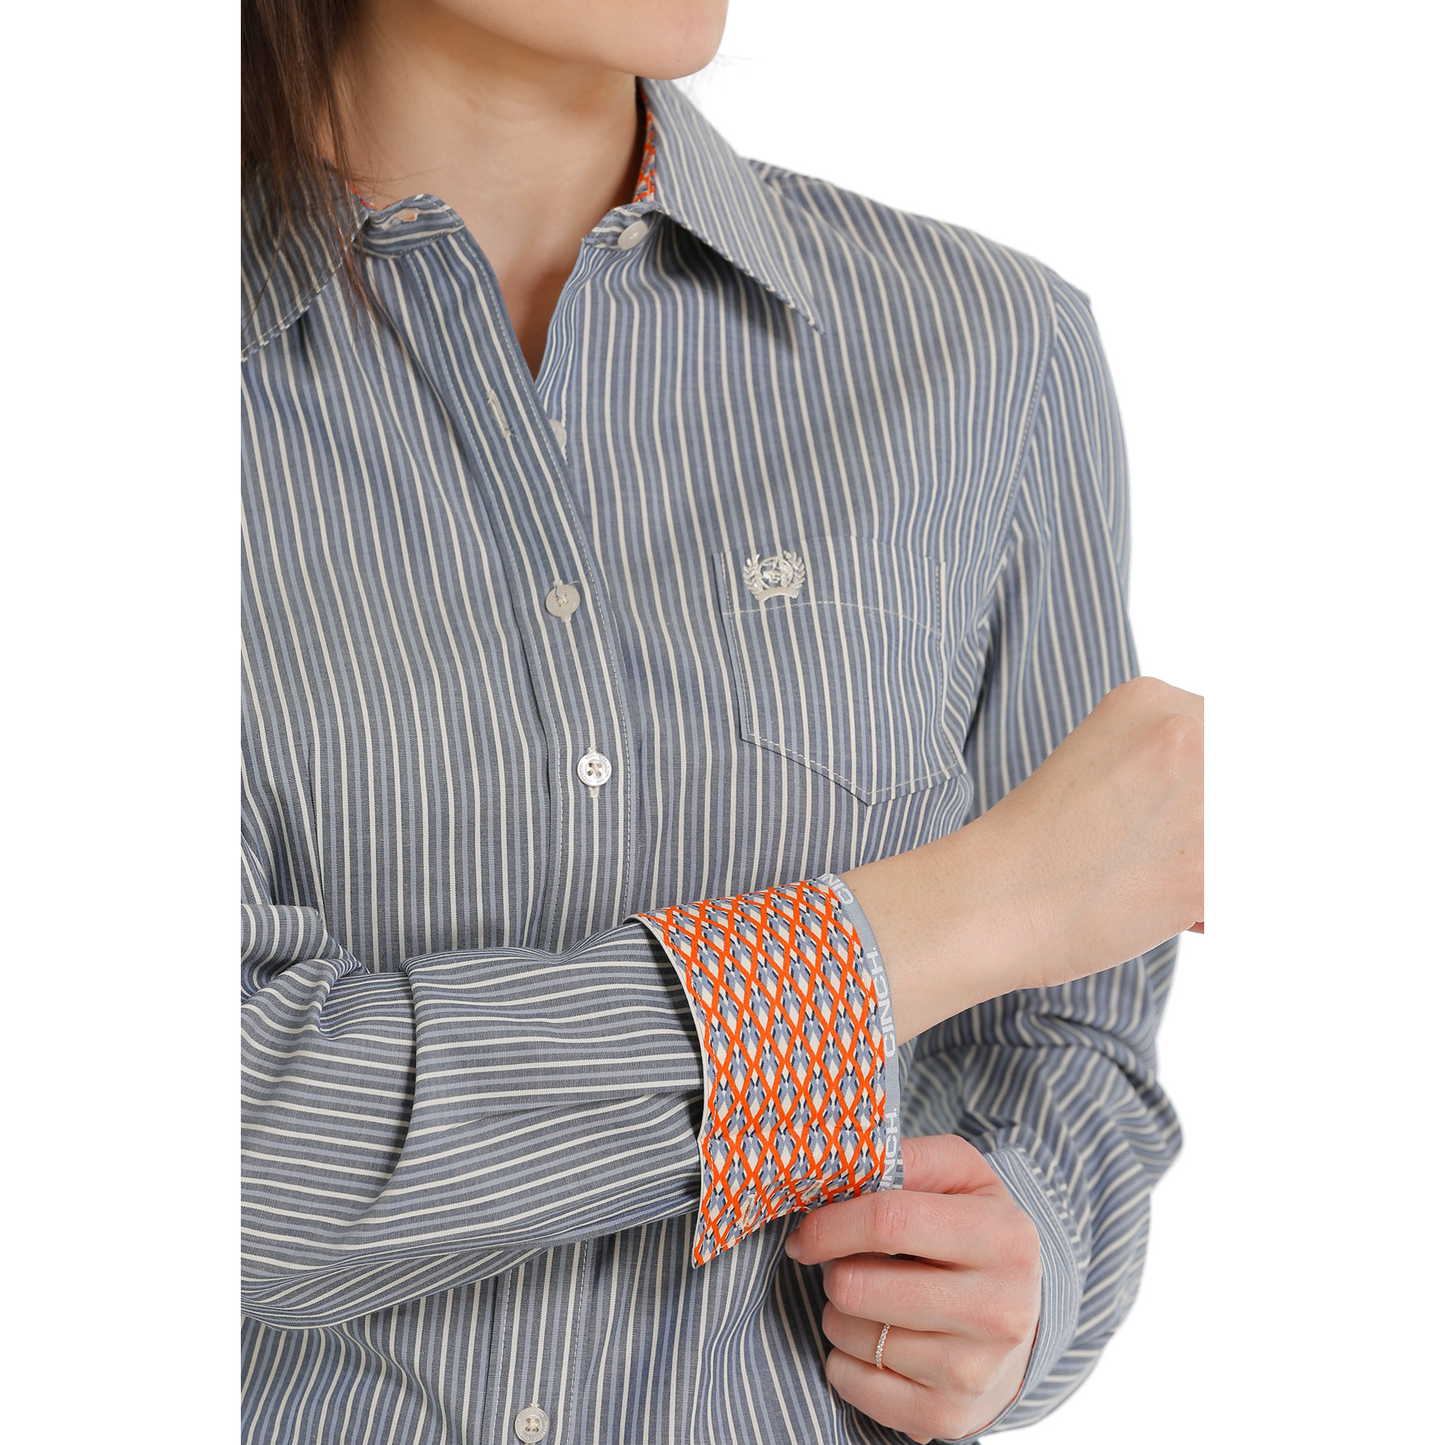 Load image into Gallery viewer, Cinch® Ladies Pinstripe Light Blue Button Down Shirt MSW9164196
